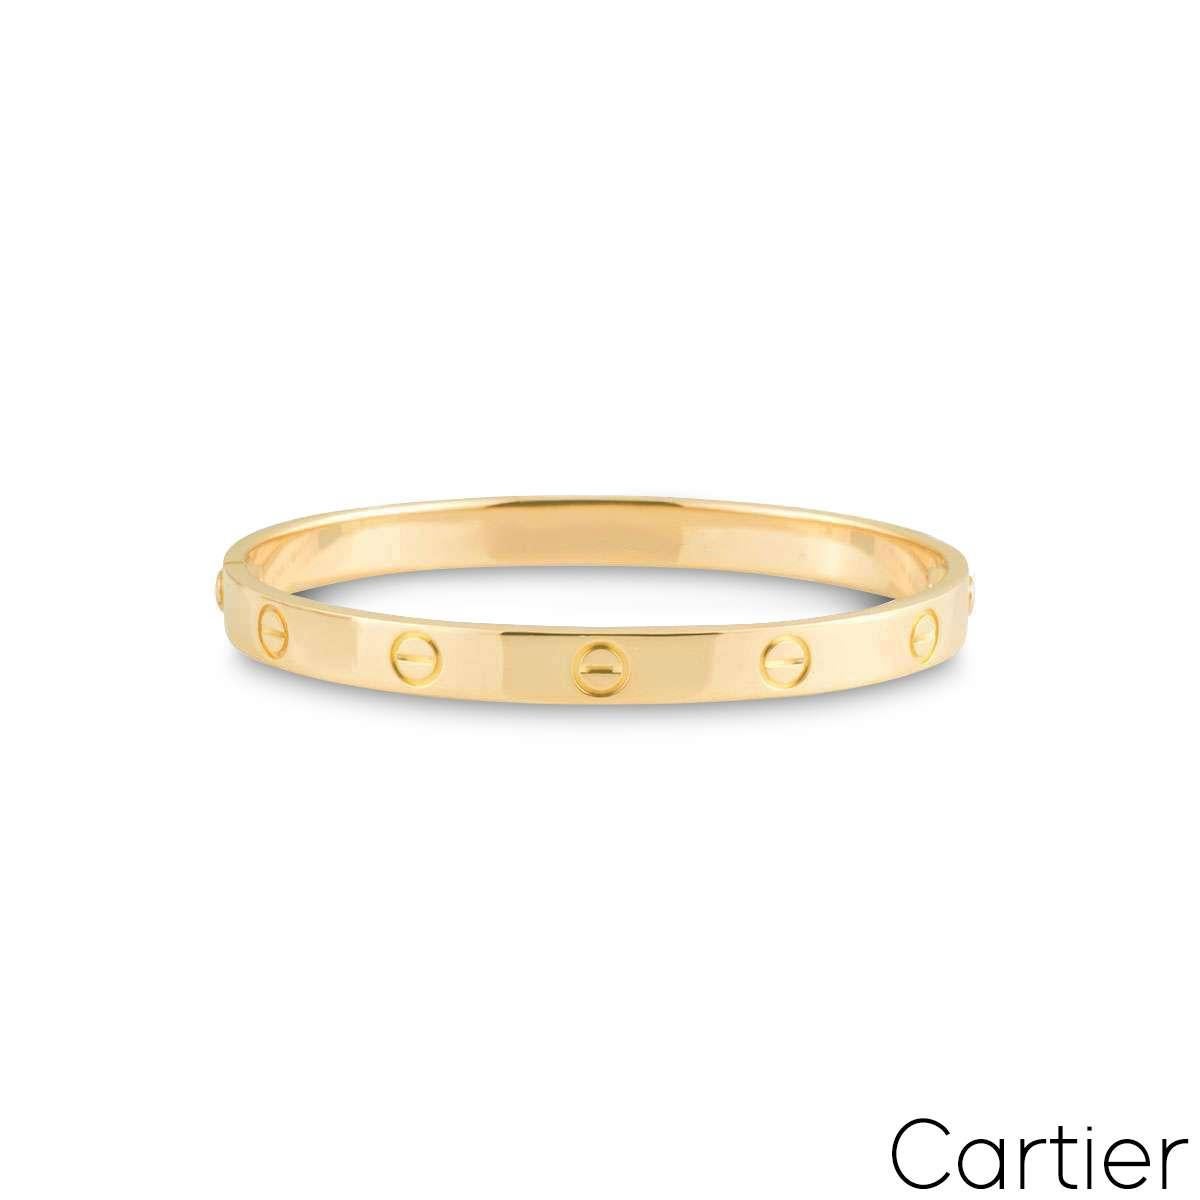 An iconic 18k yellow gold Cartier bracelet, from the Love collection. Featuring Cartier's signature screw motif design, this bracelet is fitted with the new style screw fitting. Weighing 34.9 grams, the bracelet is a size 18.

Comes complete with